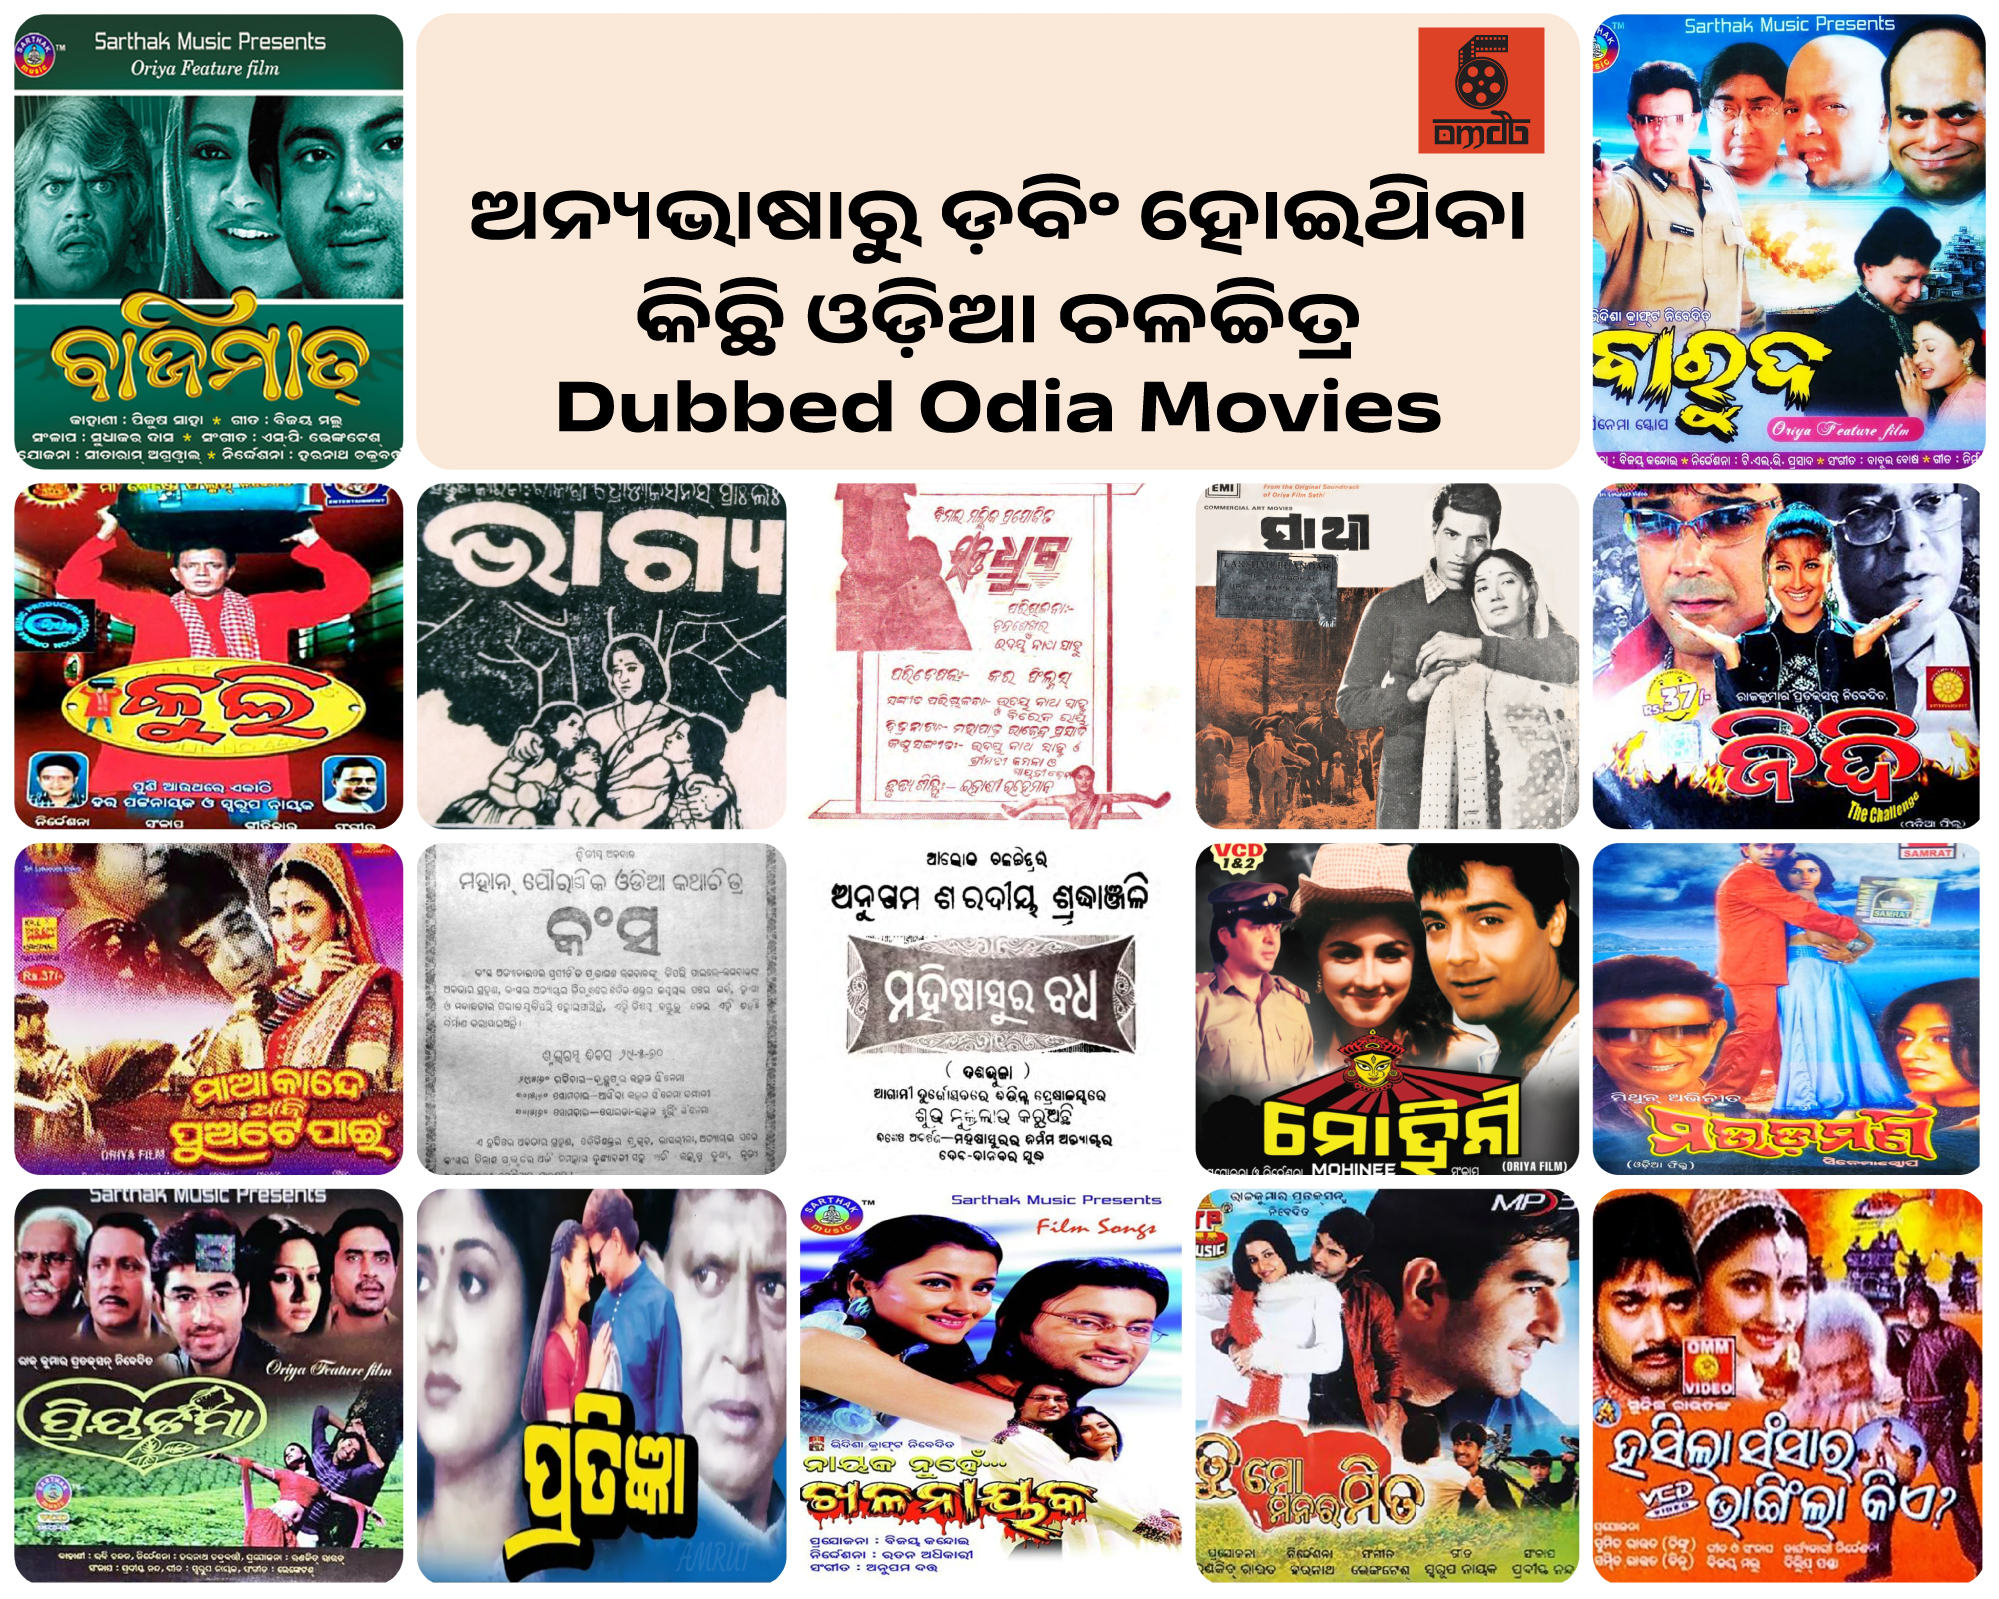 Dubbed Odia Movies